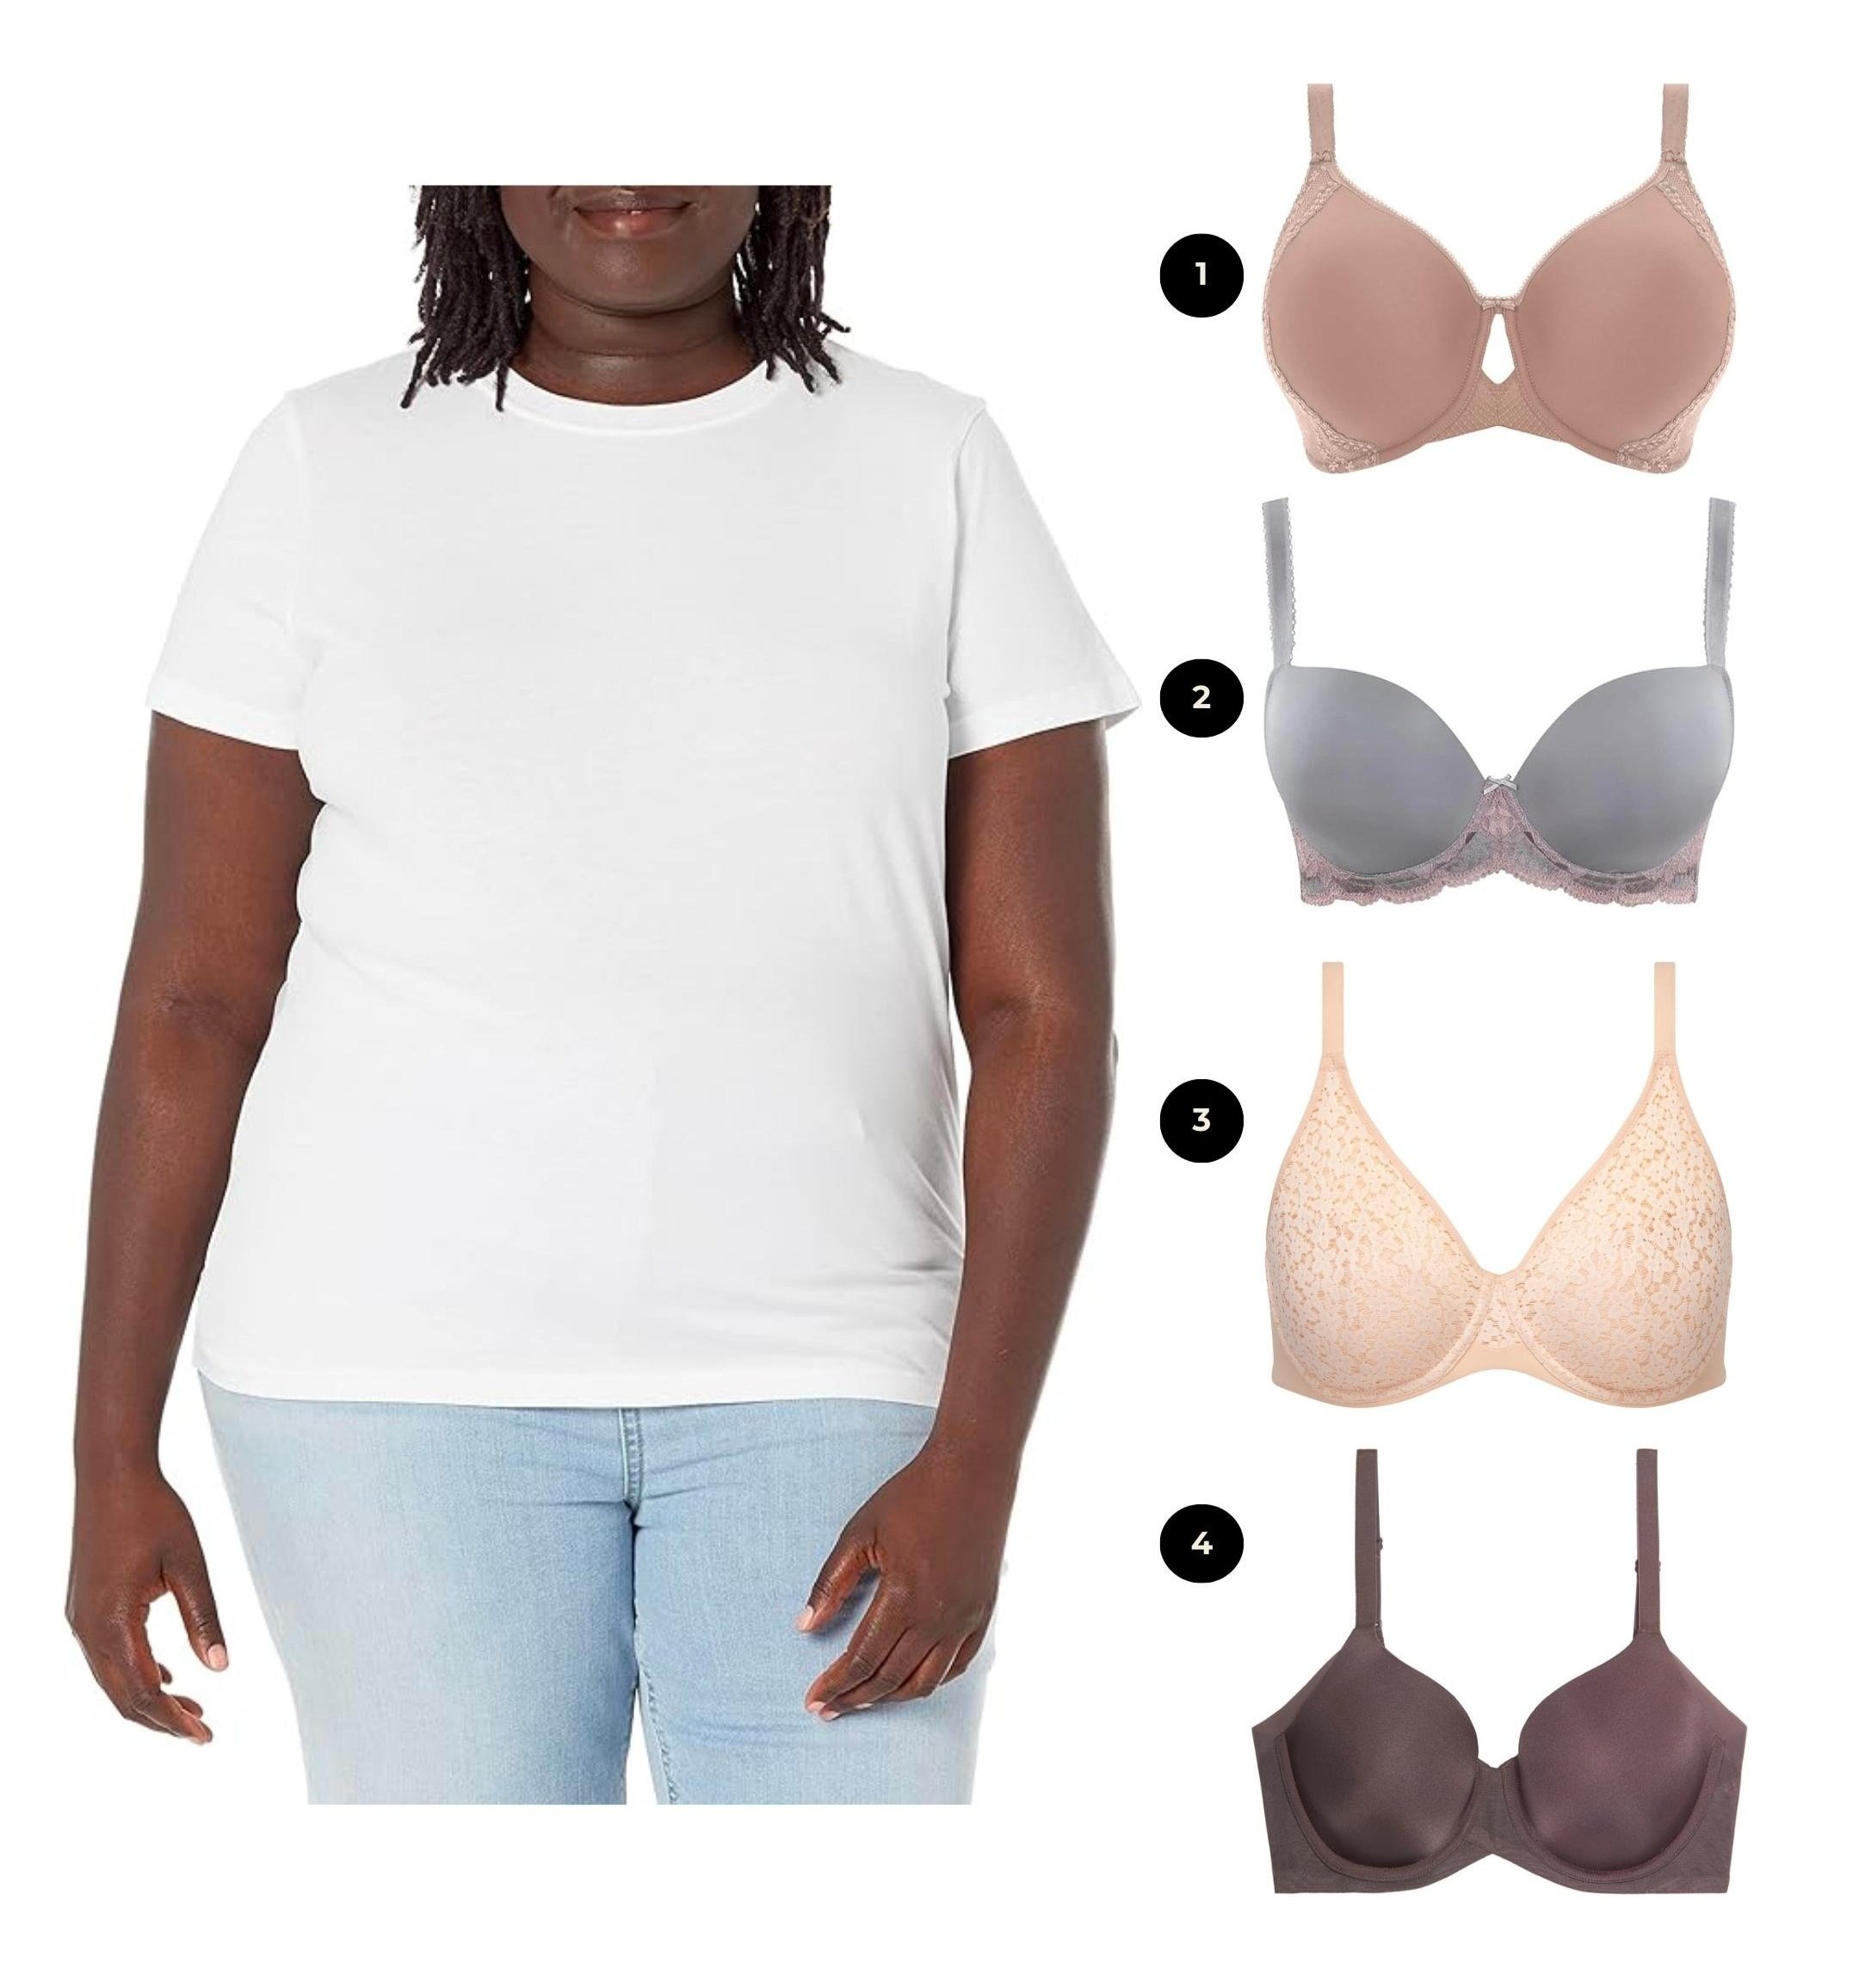 Bras for Every Occasion: Choosing The Best Bra for Your Outfit – BRABAR